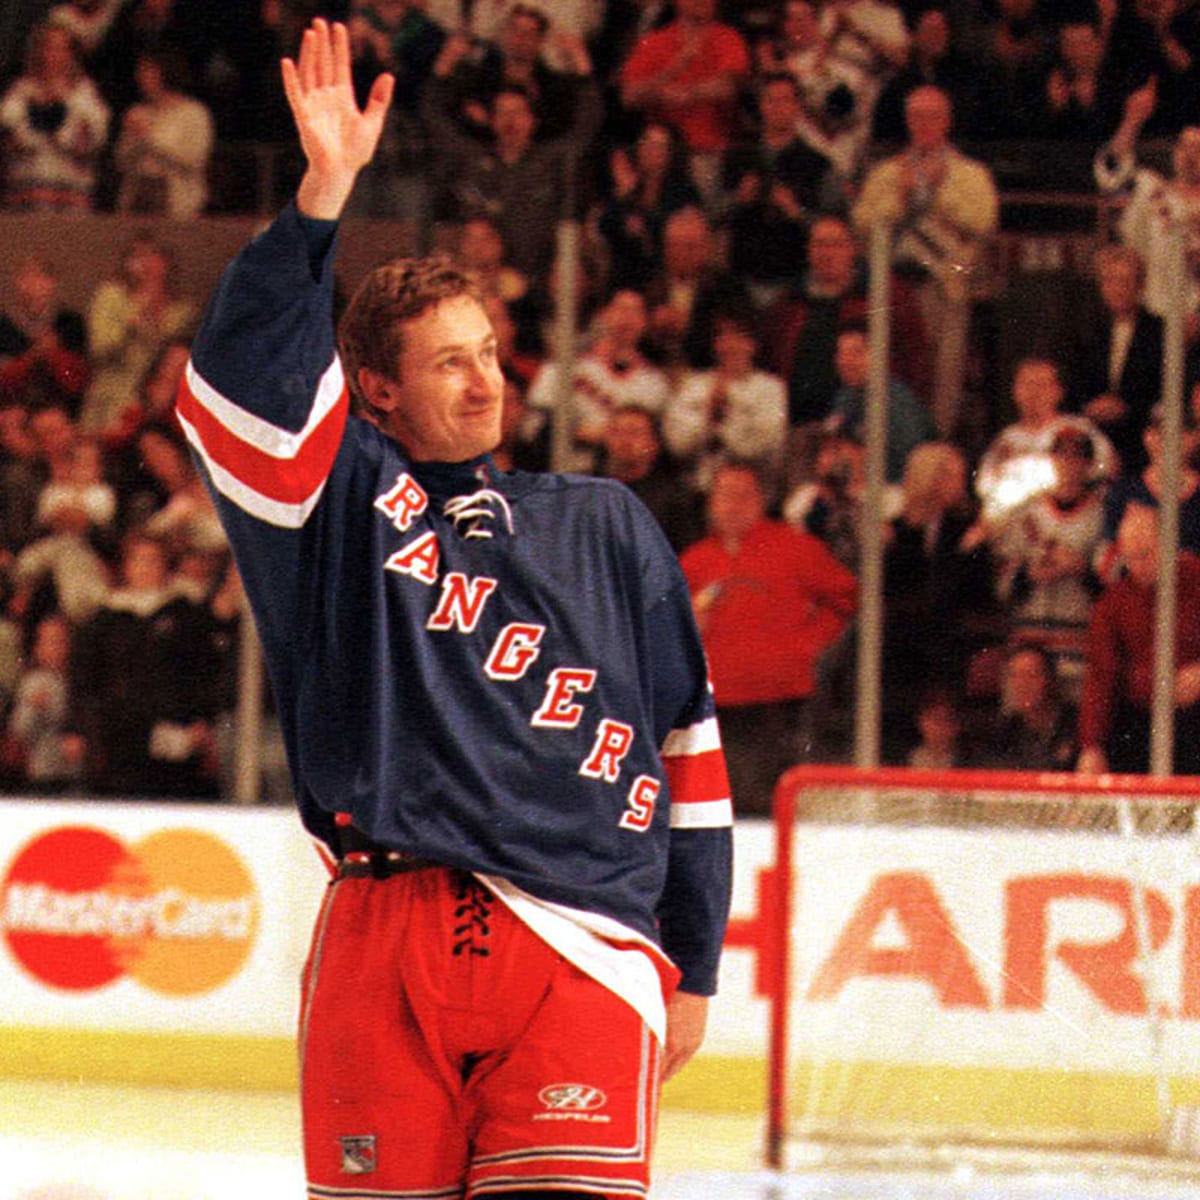 Wayne Gretzky, Mario Lemieux and Others: The Best Retired Numbers